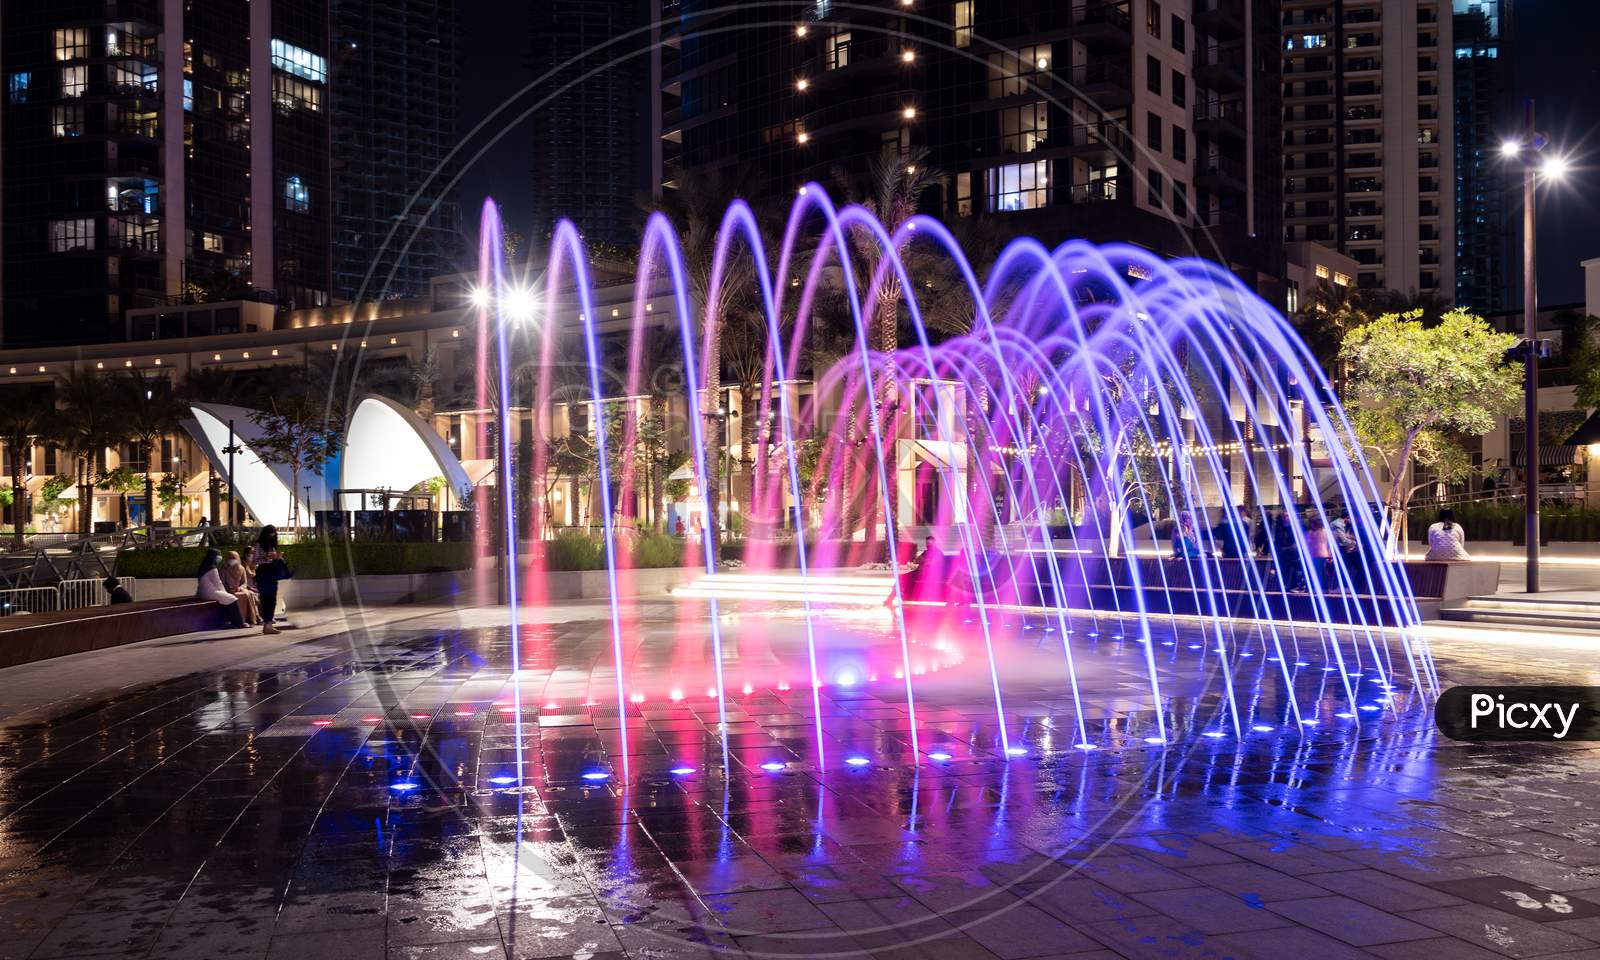 1St December 2020.Colorful Fountains At Dubai Creek Harbor With Embankment Promenade ,Hotels, Shops And Residences Captured In The Evening Time At The Dubai Creek Harbor, Ras Al Khor, Dubai , Uae.